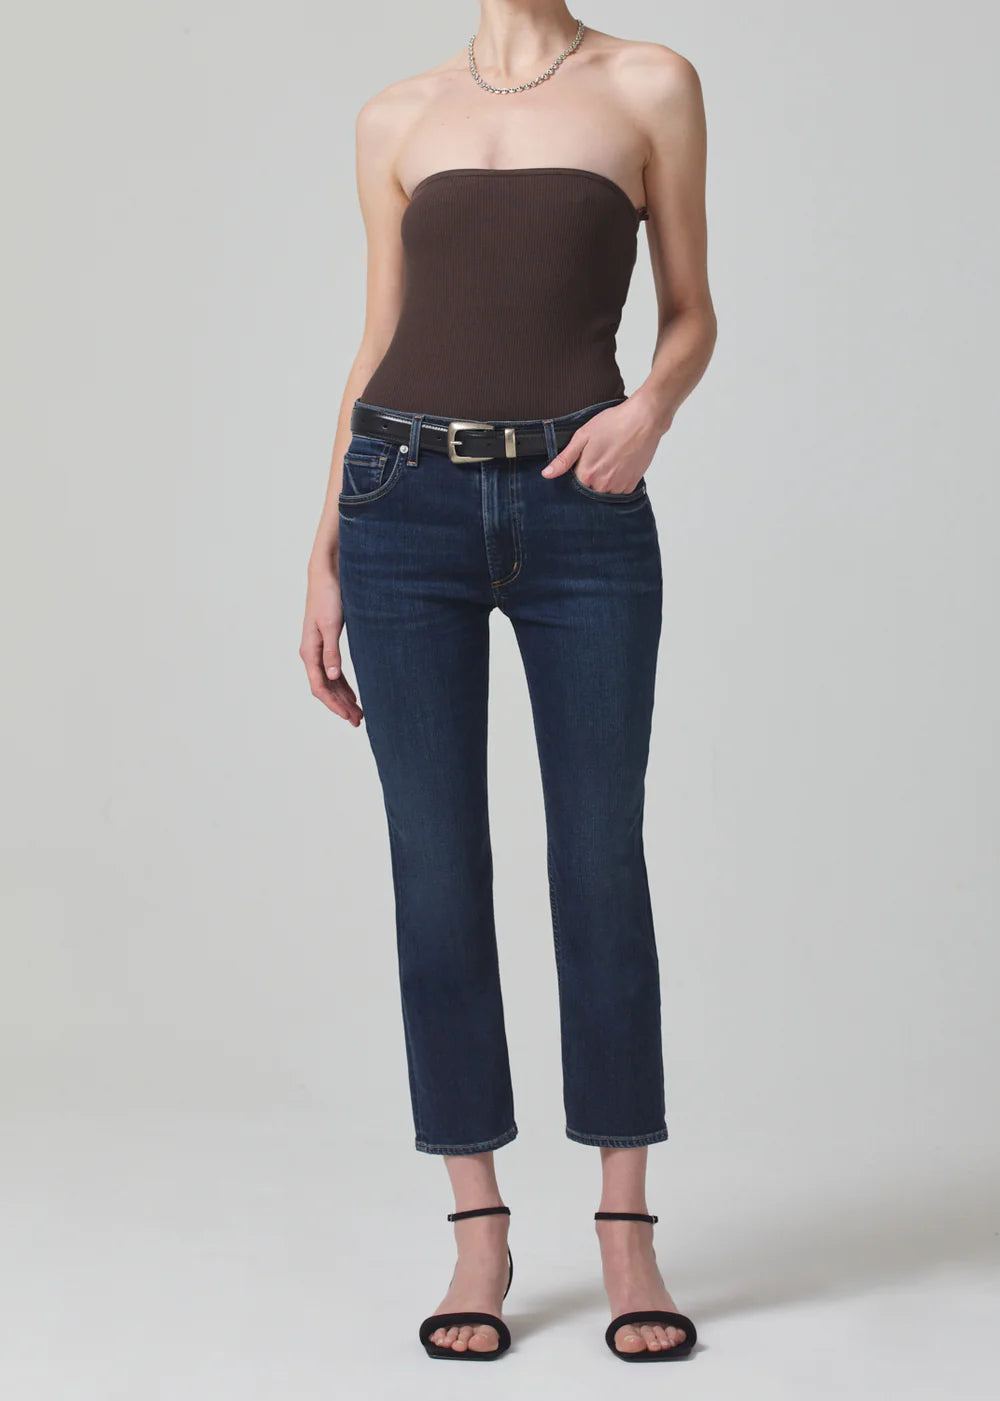 Citizens of Humanity Isola Straight Crop, cropped jeans, cropped denim, straight leg denim, mid-rise denim, denim jeans, women's clothing